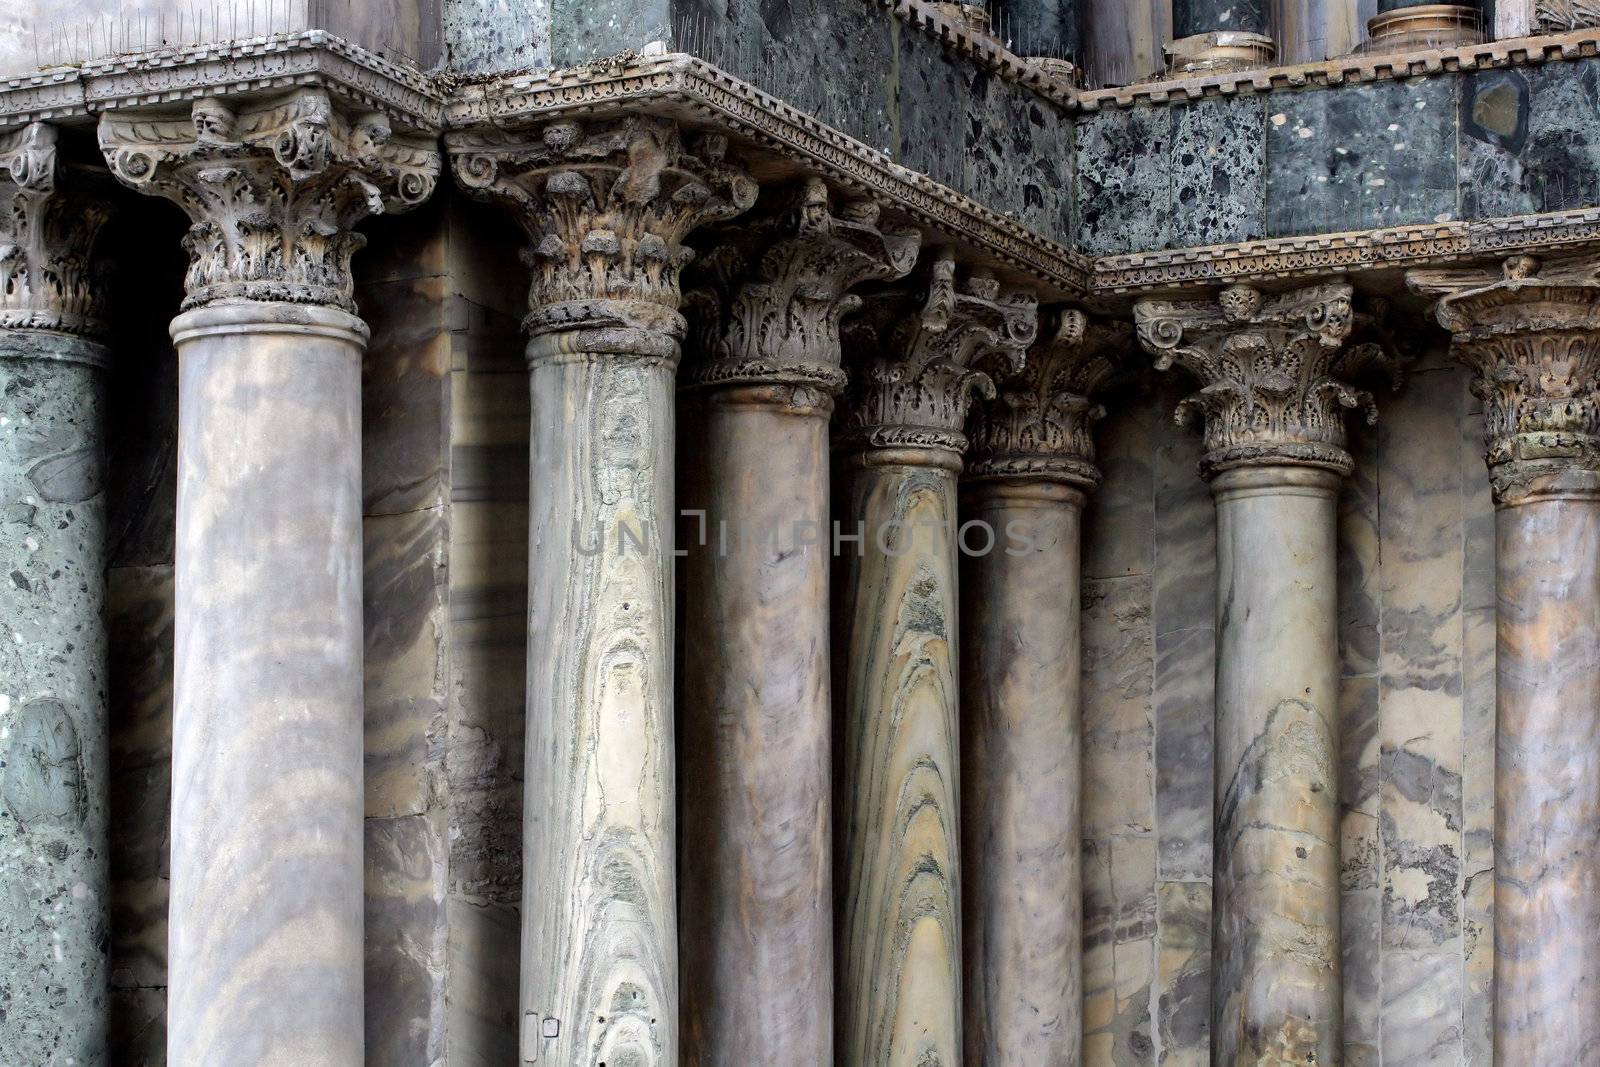 A series of marble columns in Venice Italy.
